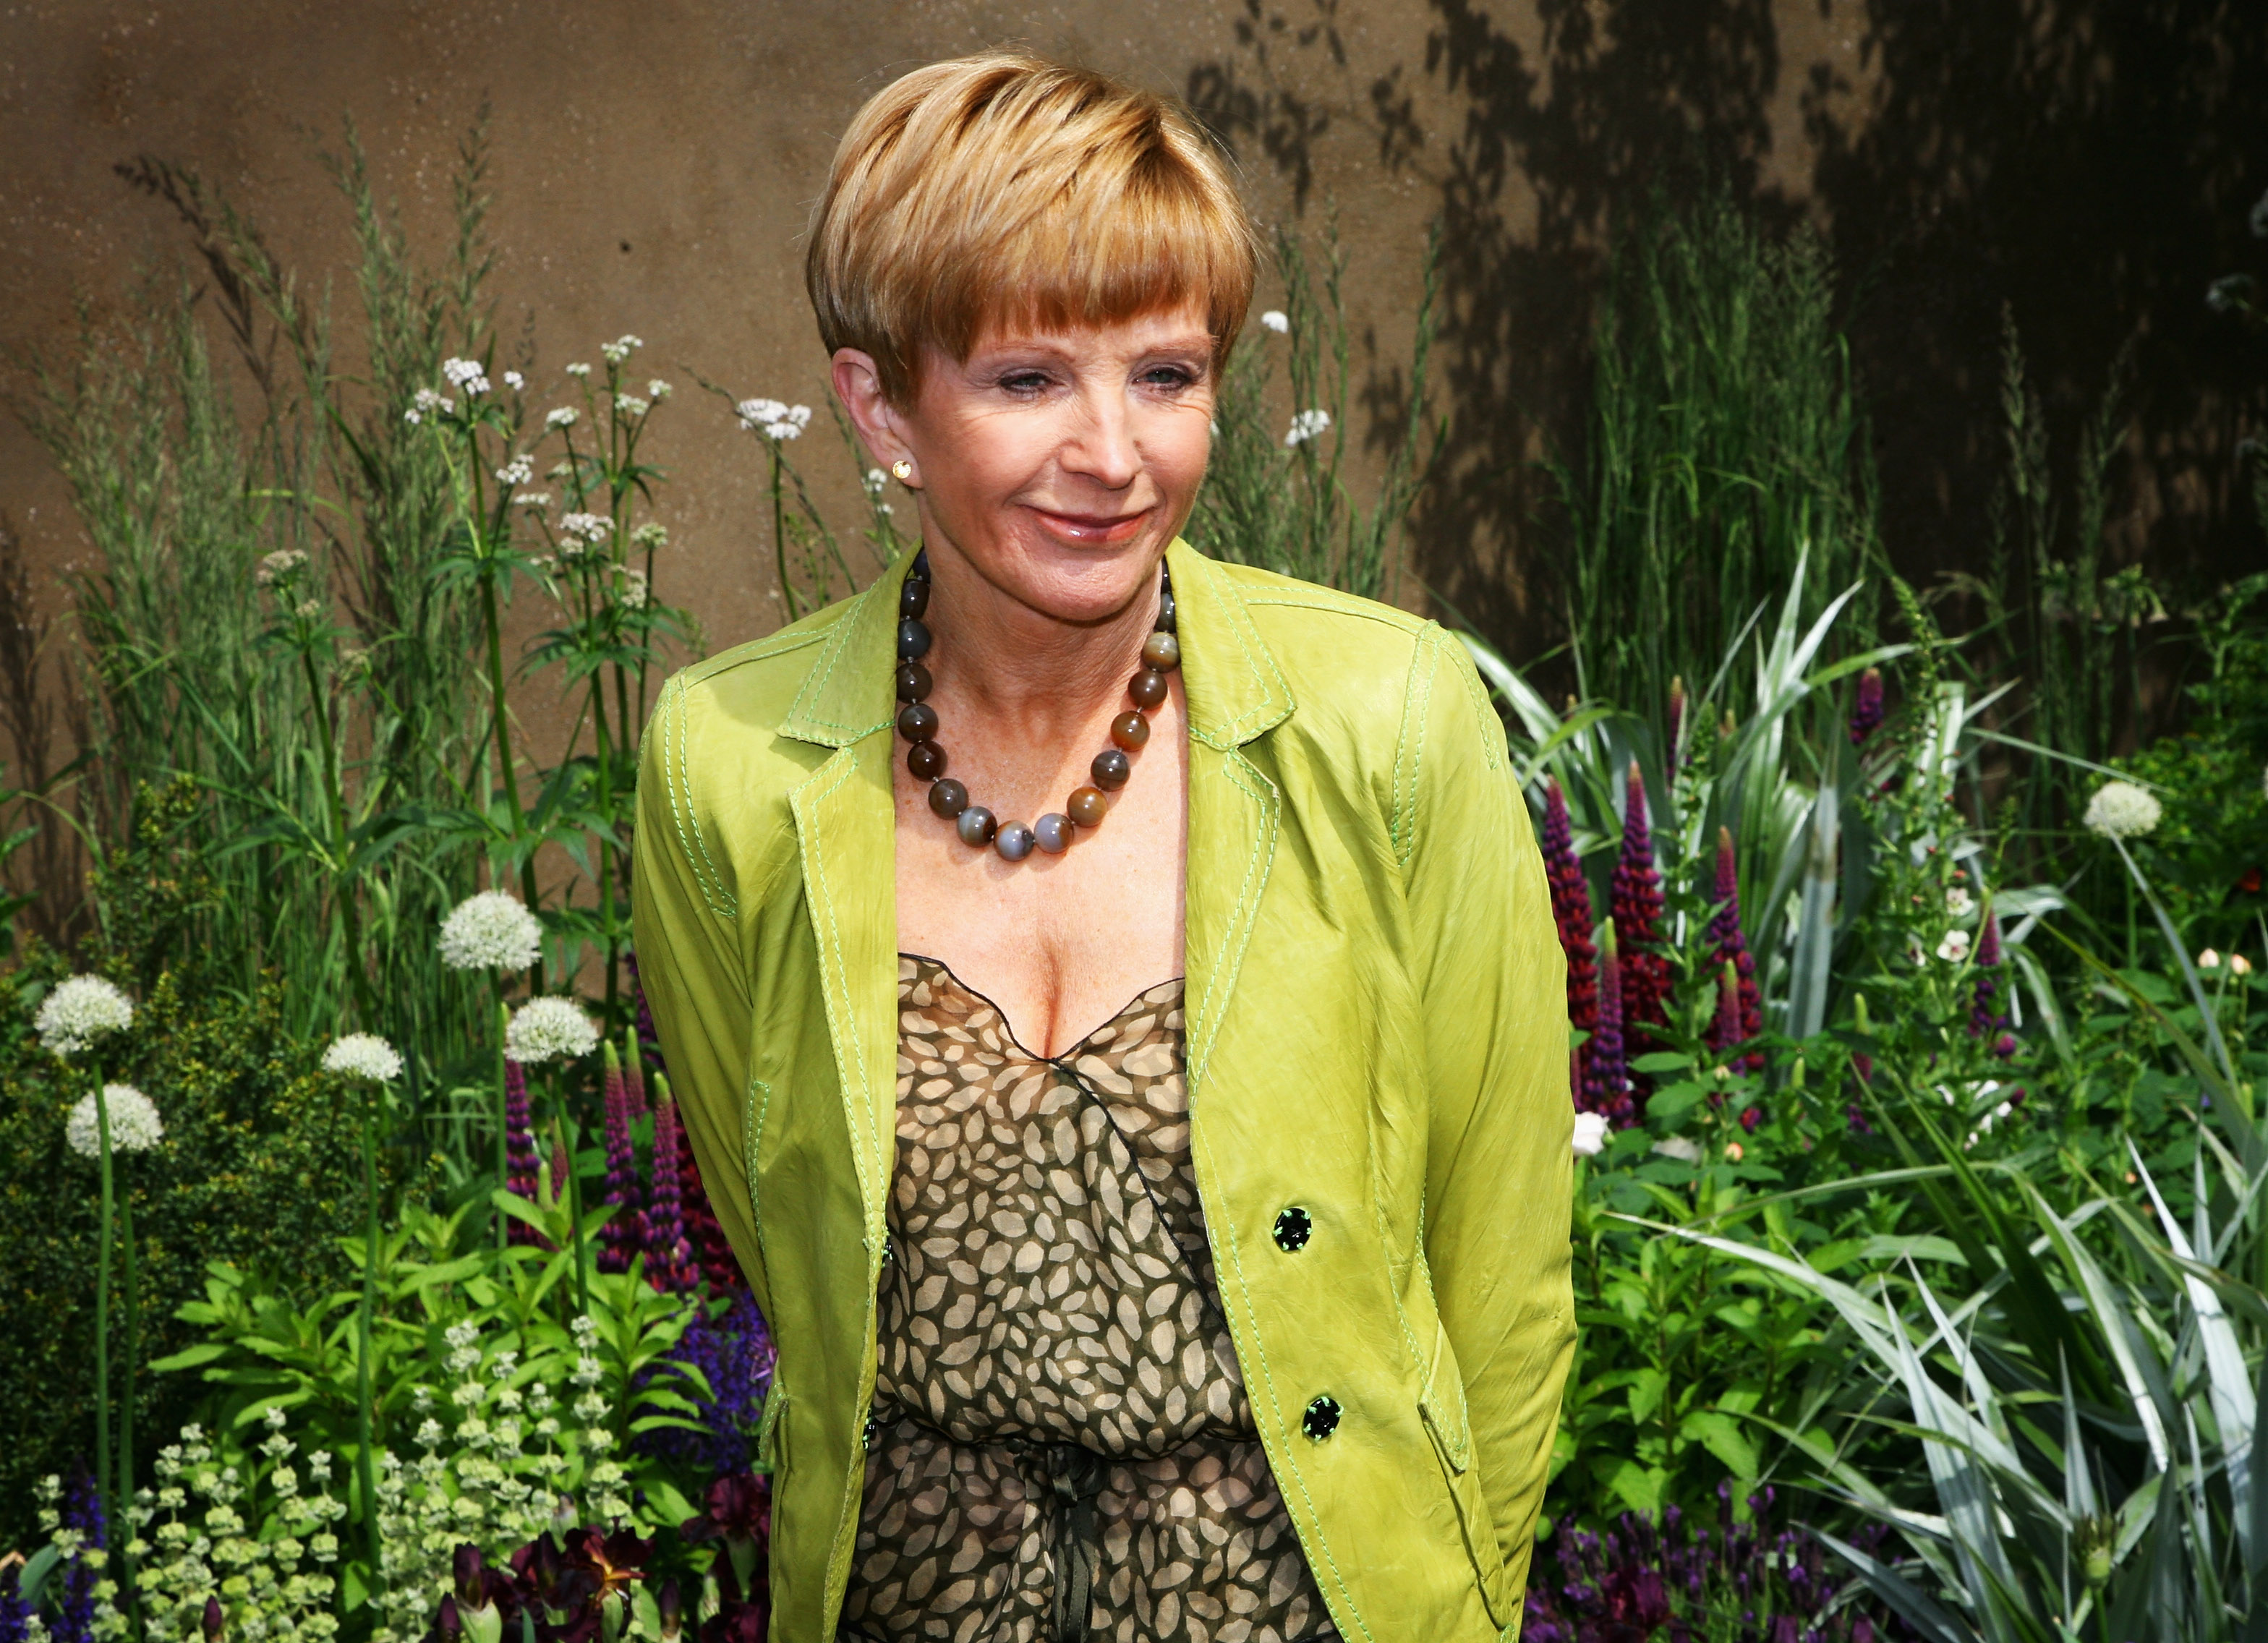 Anne Robinson poses for a photograph during the Press and VIP day for Chelsea Flower Show in London, England, on May 19, 2008. | Source: Getty Images